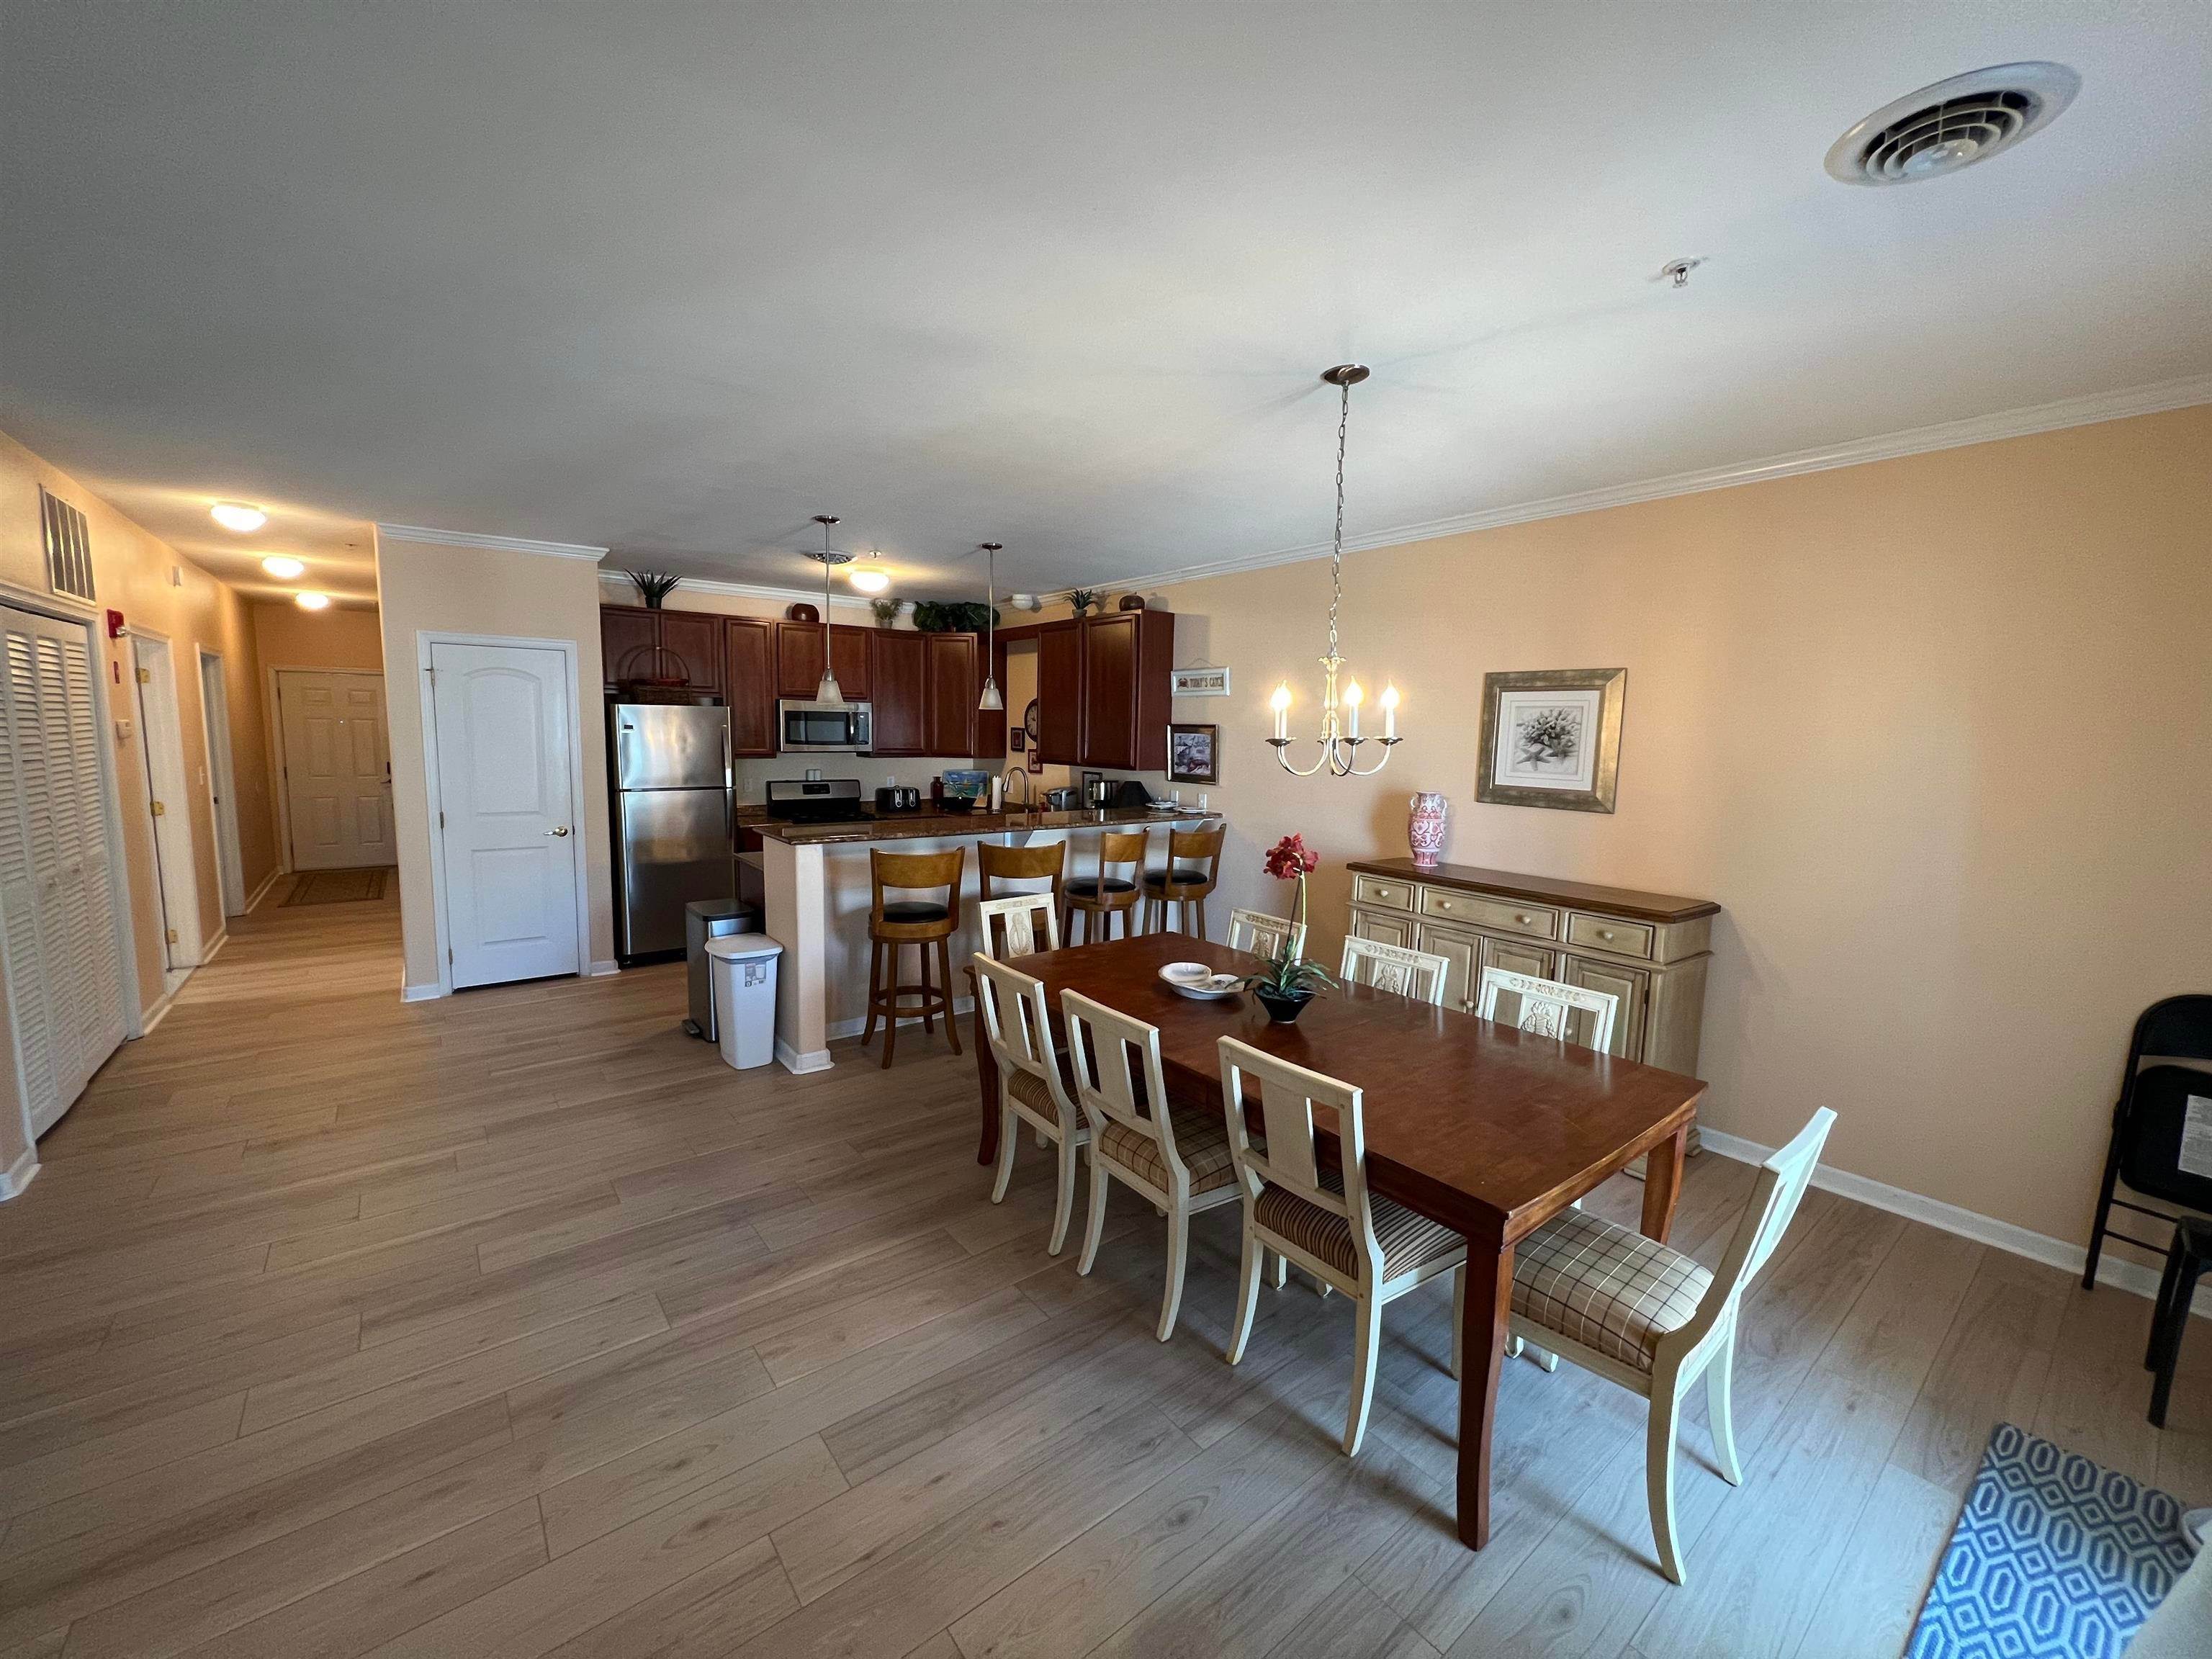 18. Condominiums for Sale at 501 E Stockton Road Wildwood Crest, New Jersey 08260 United States